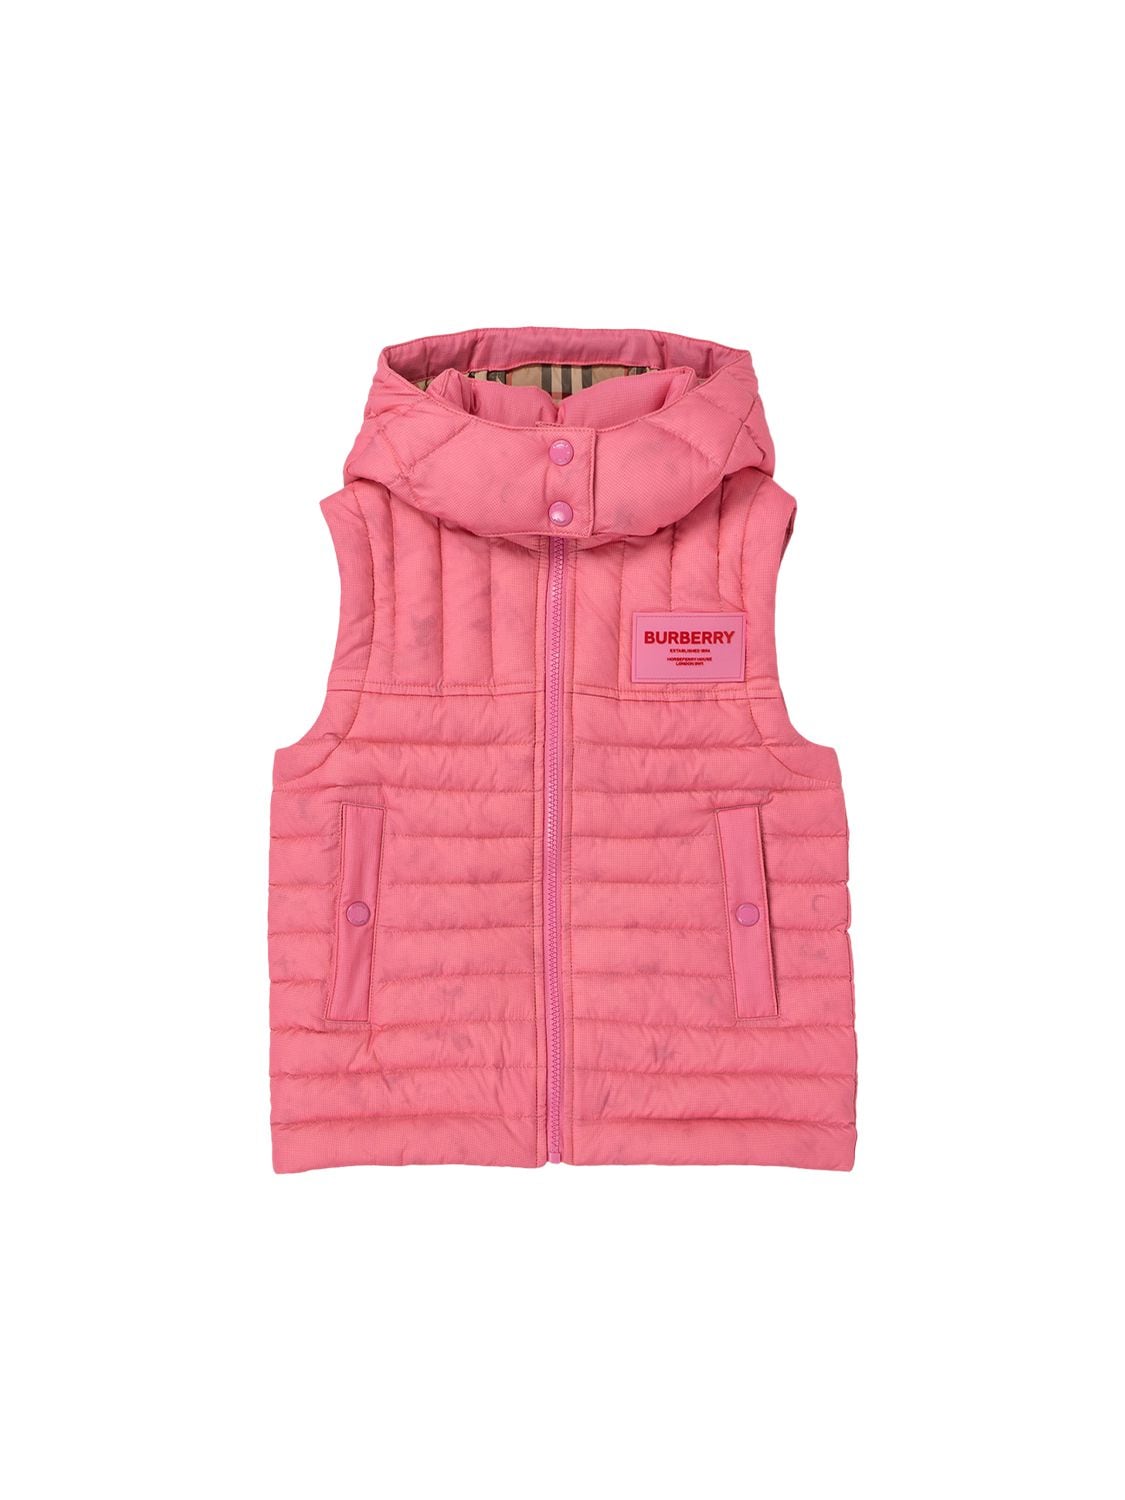 BURBERRY HOODED PUFFER VEST W/ CHECK LINING